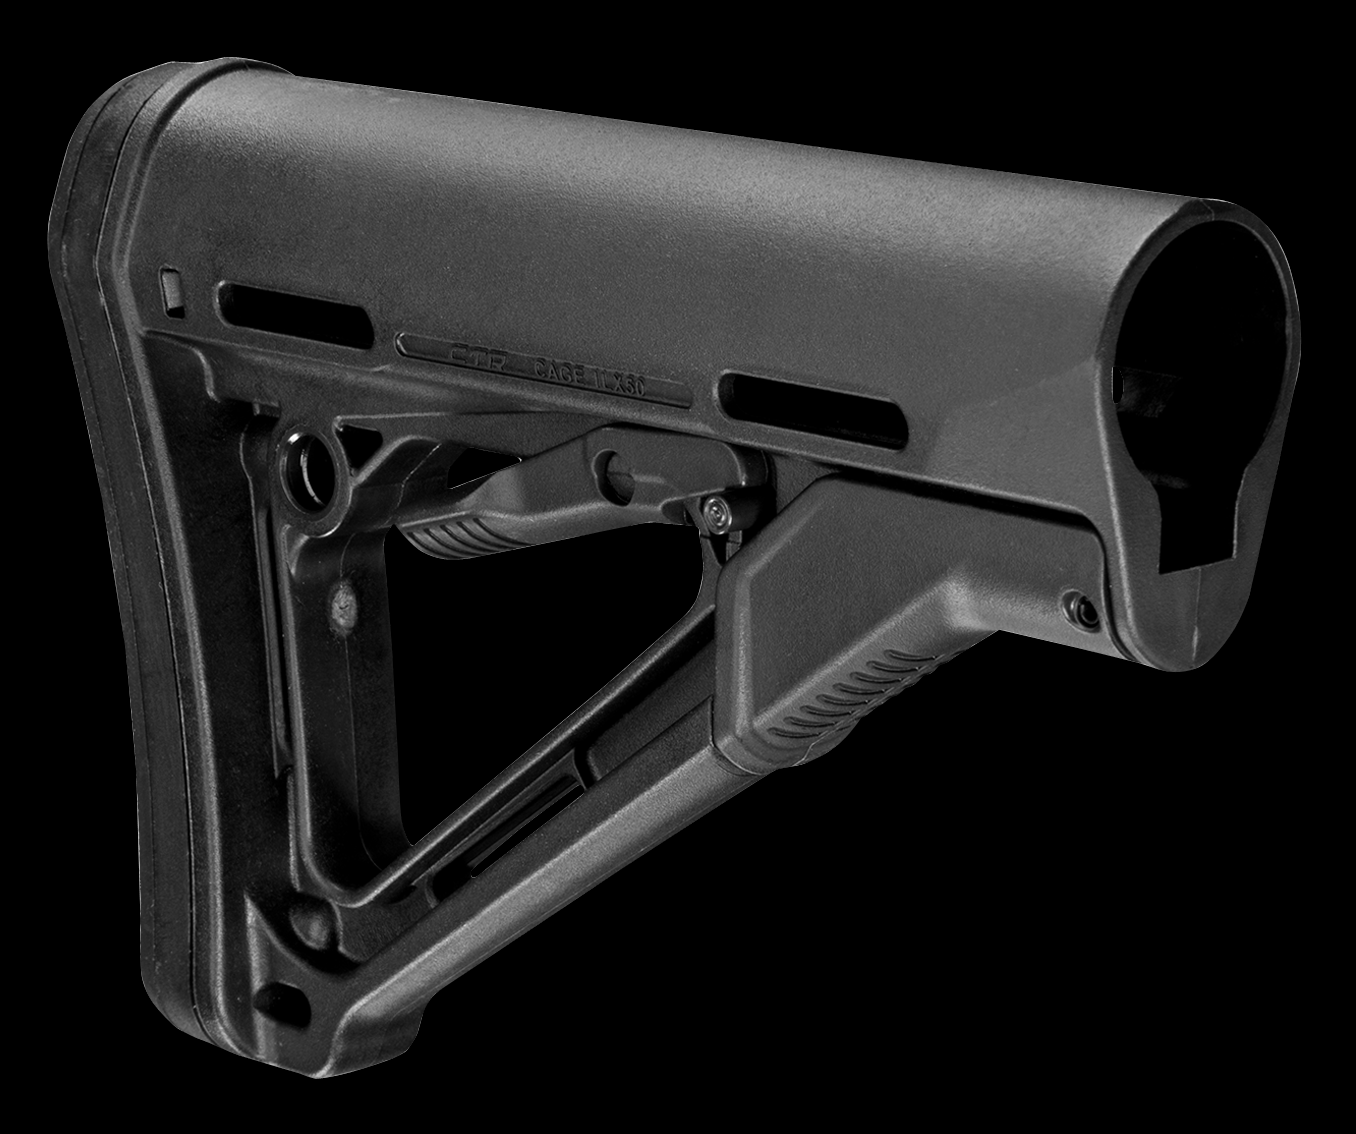 Magpul MAG311-BLK CTR Carbine Stock Black Synthetic for AR-15, M16, M4 with Commercial Tube (Tube Not Included)